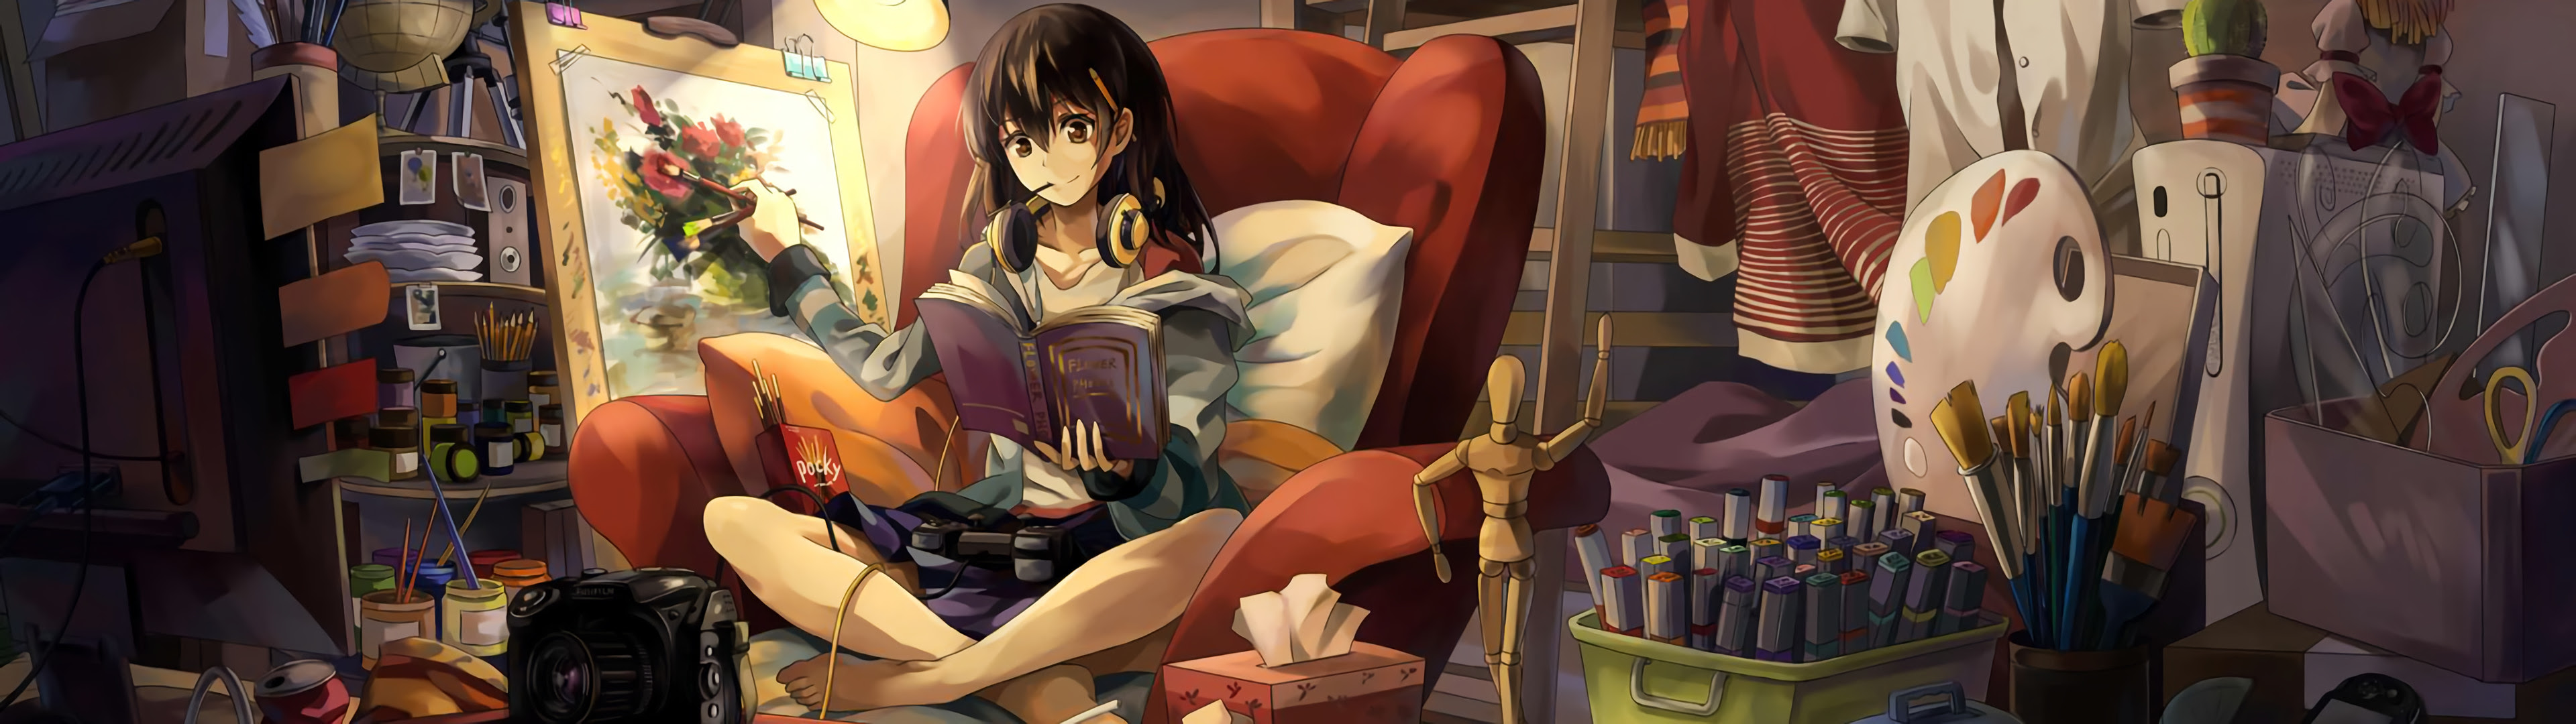 17+ Anime Wallpaper 3840X1080 Pictures